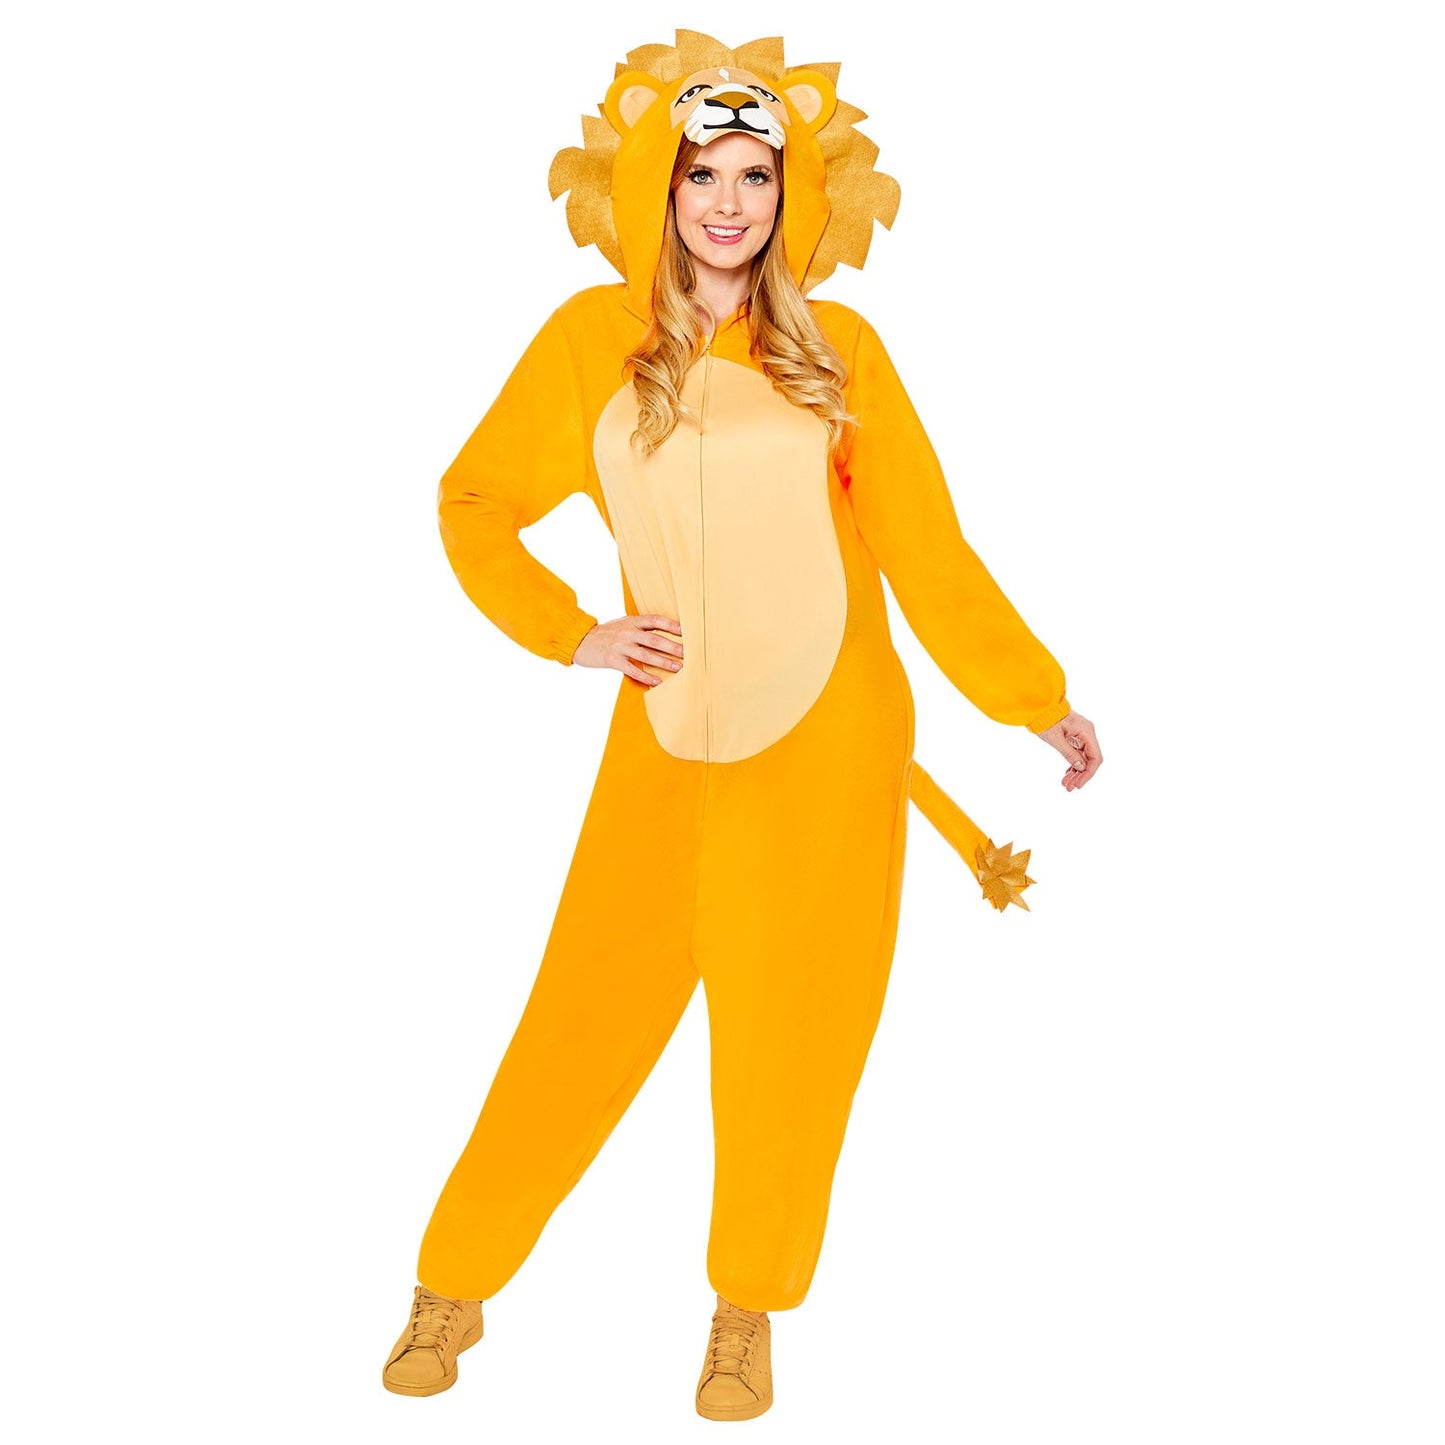 Adult Lion Onesie Costume includes jumpsuit with hood